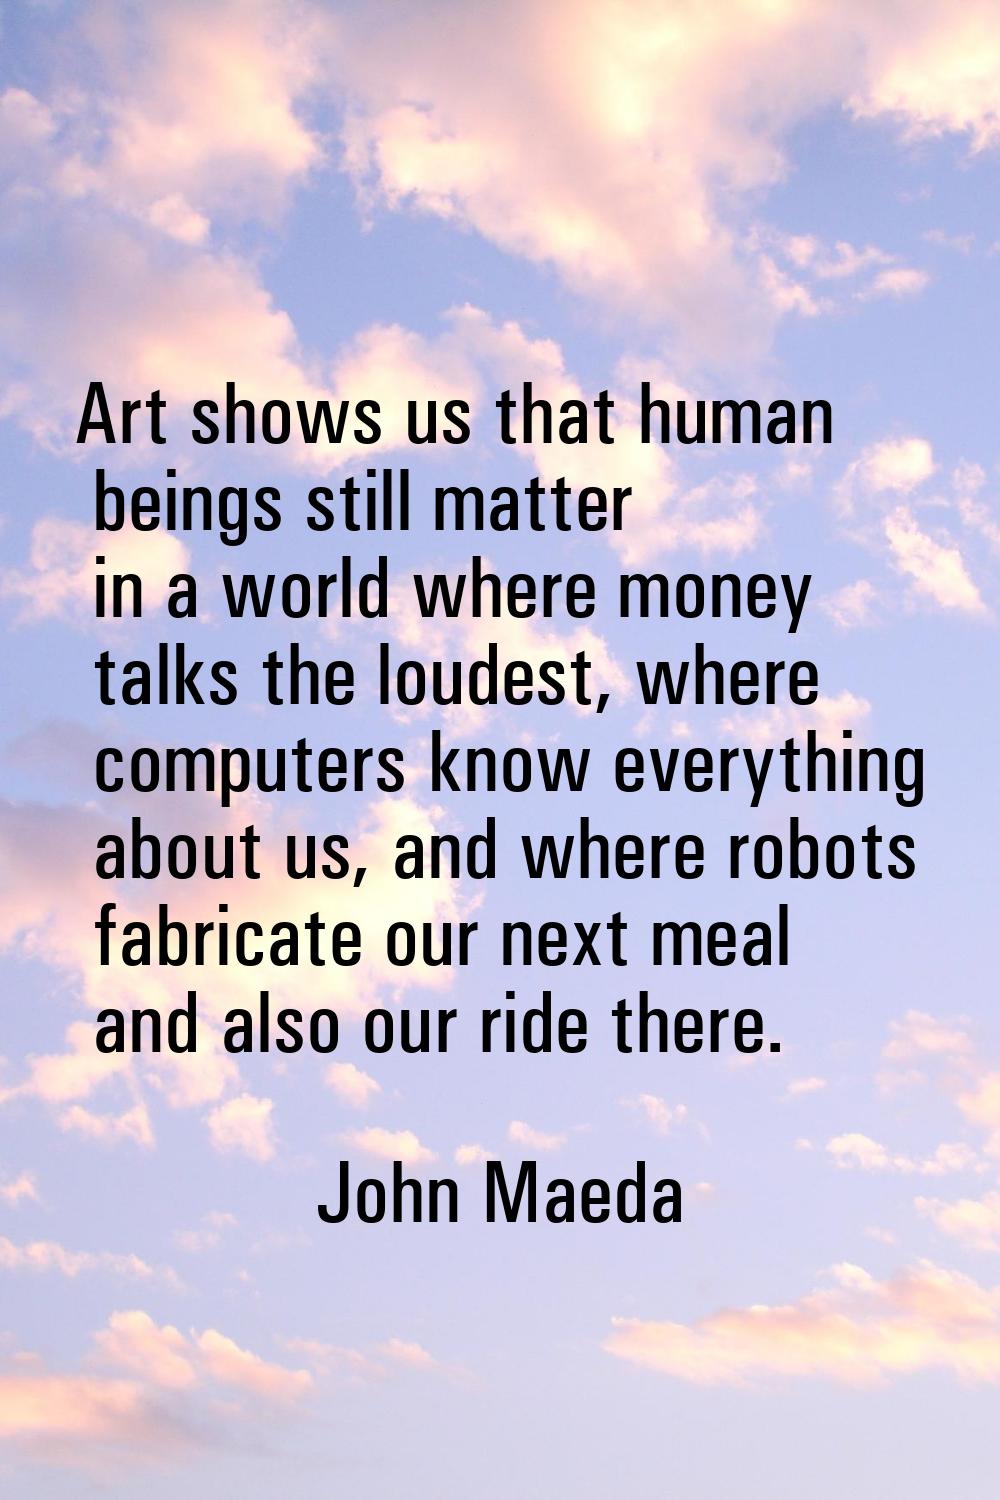 Art shows us that human beings still matter in a world where money talks the loudest, where compute